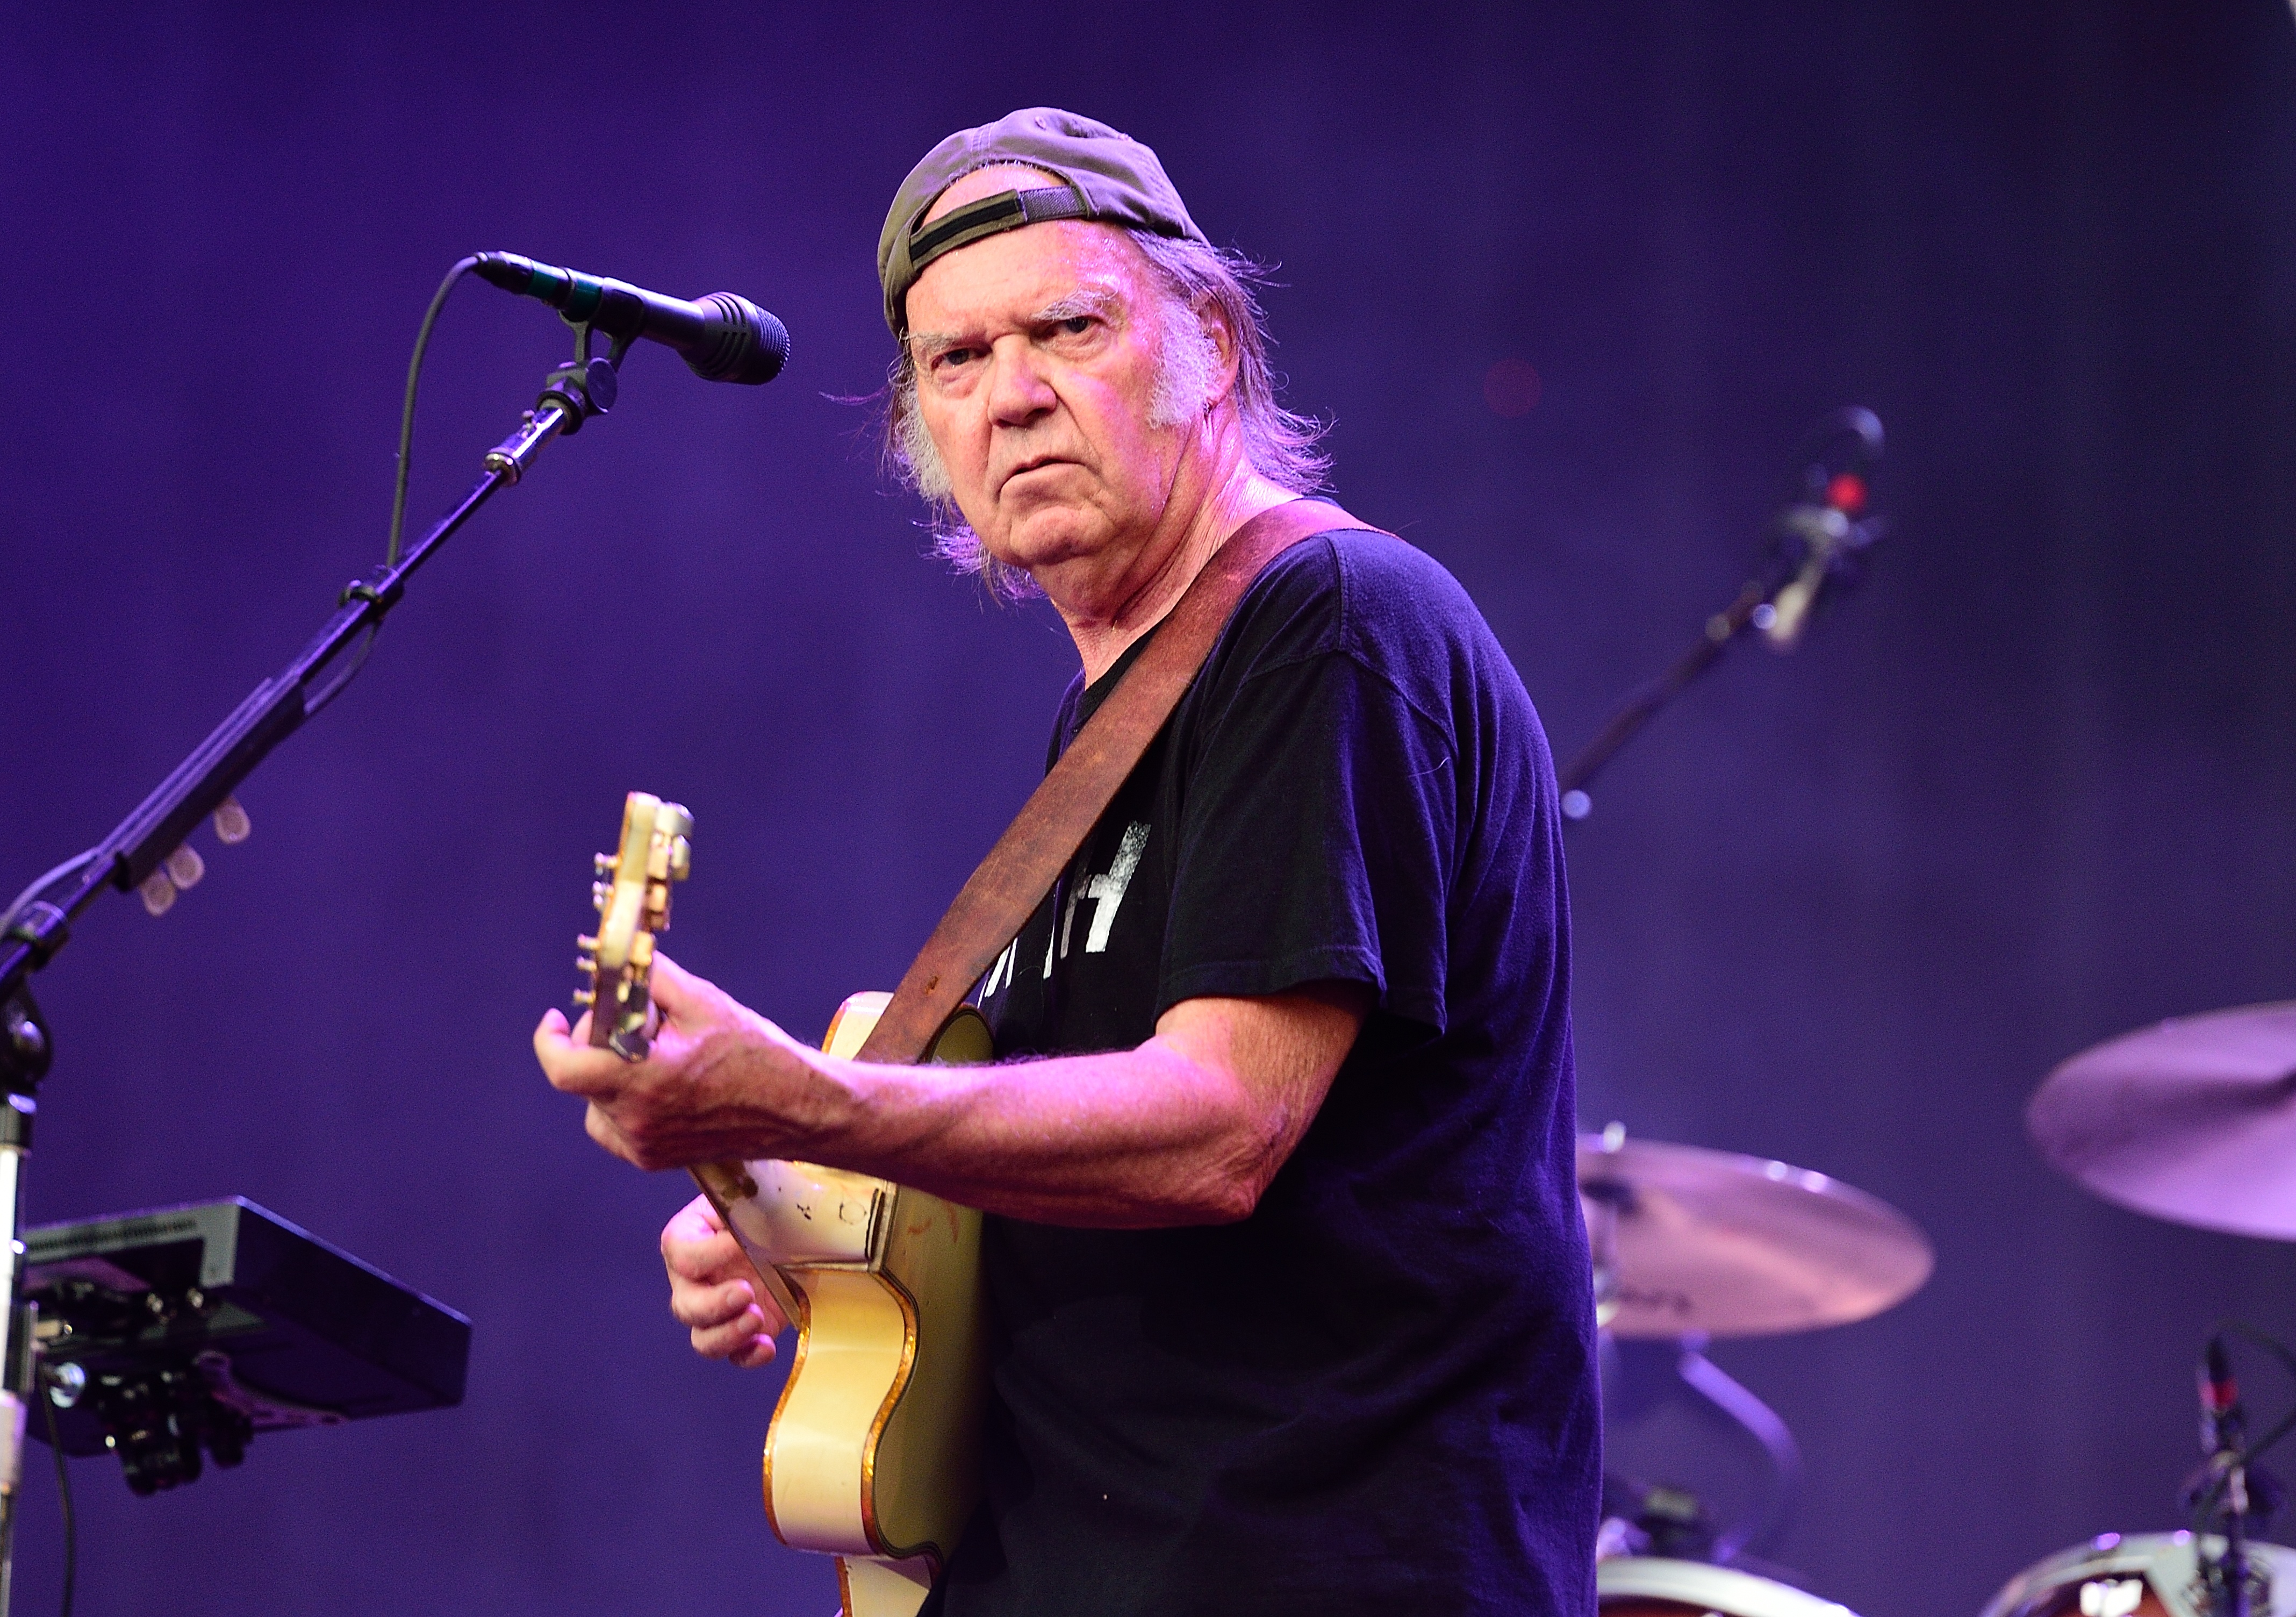 Neil Young of Neil Young and Crazy Horse performs on stage at British Summer Time Festival at Hyde Park on July 12, 2014 in London, United Kingdom. (Gus Stewart—Redferns/Getty Images)